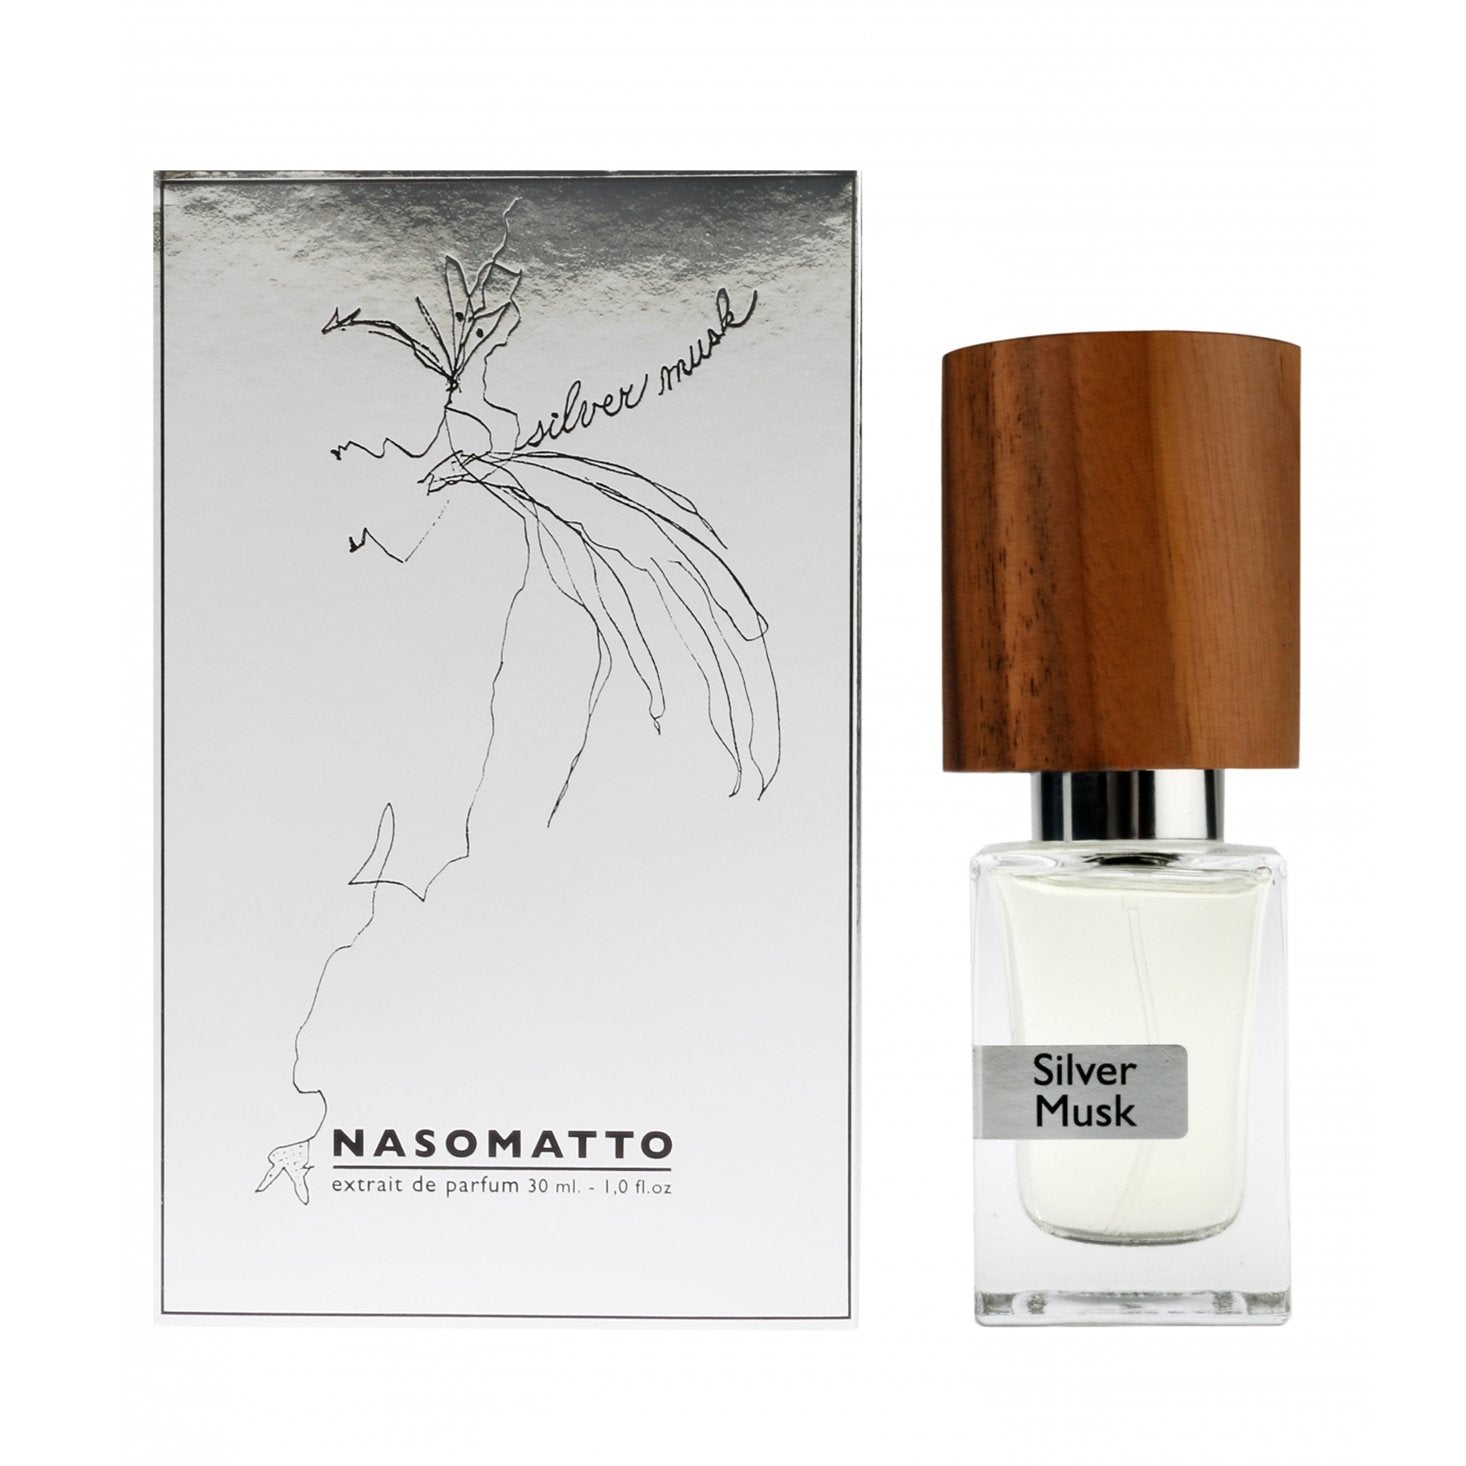 BEON.COM.AU Nasomatto's Silver Musk Parfum Extrait is a soft, clean, gently warm scent. It's sensual nature has its foundation in Musk and other secret fragrance notes. It never tries…it just is. Utter perfection from a master perfume visionary. The beautiful glass vessel is capped with a walnut wood... Nasomatto at BEON.COM.AU